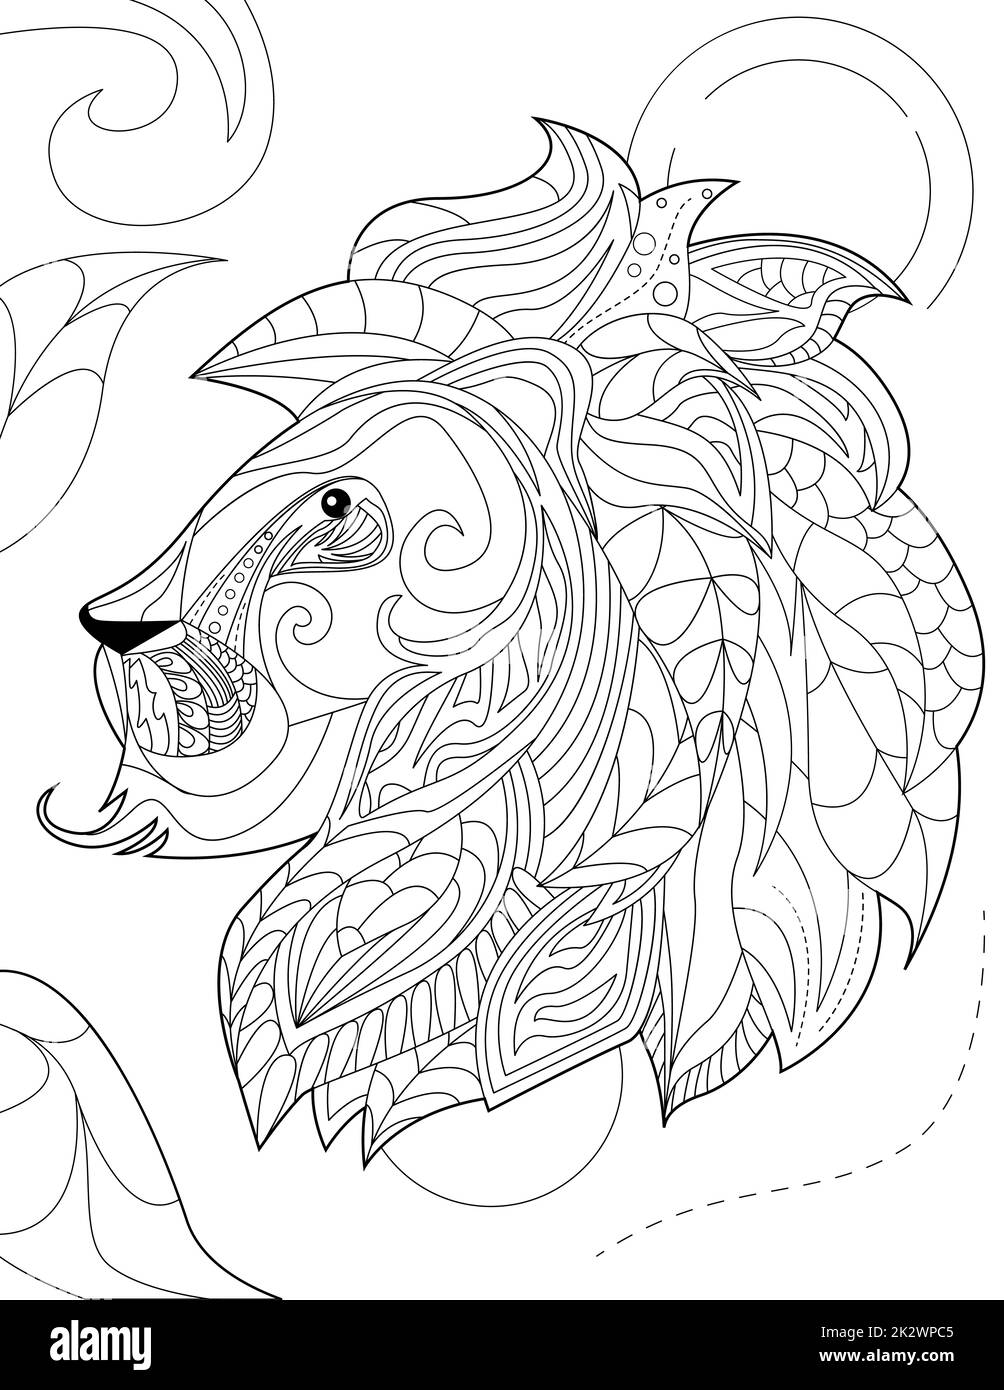 Abstract vector line drawing stylized lion foliage decorated pattern mane. Digital lineart image feline animal leaves decorations fur. Outline artwork wild cat design. Stock Photo